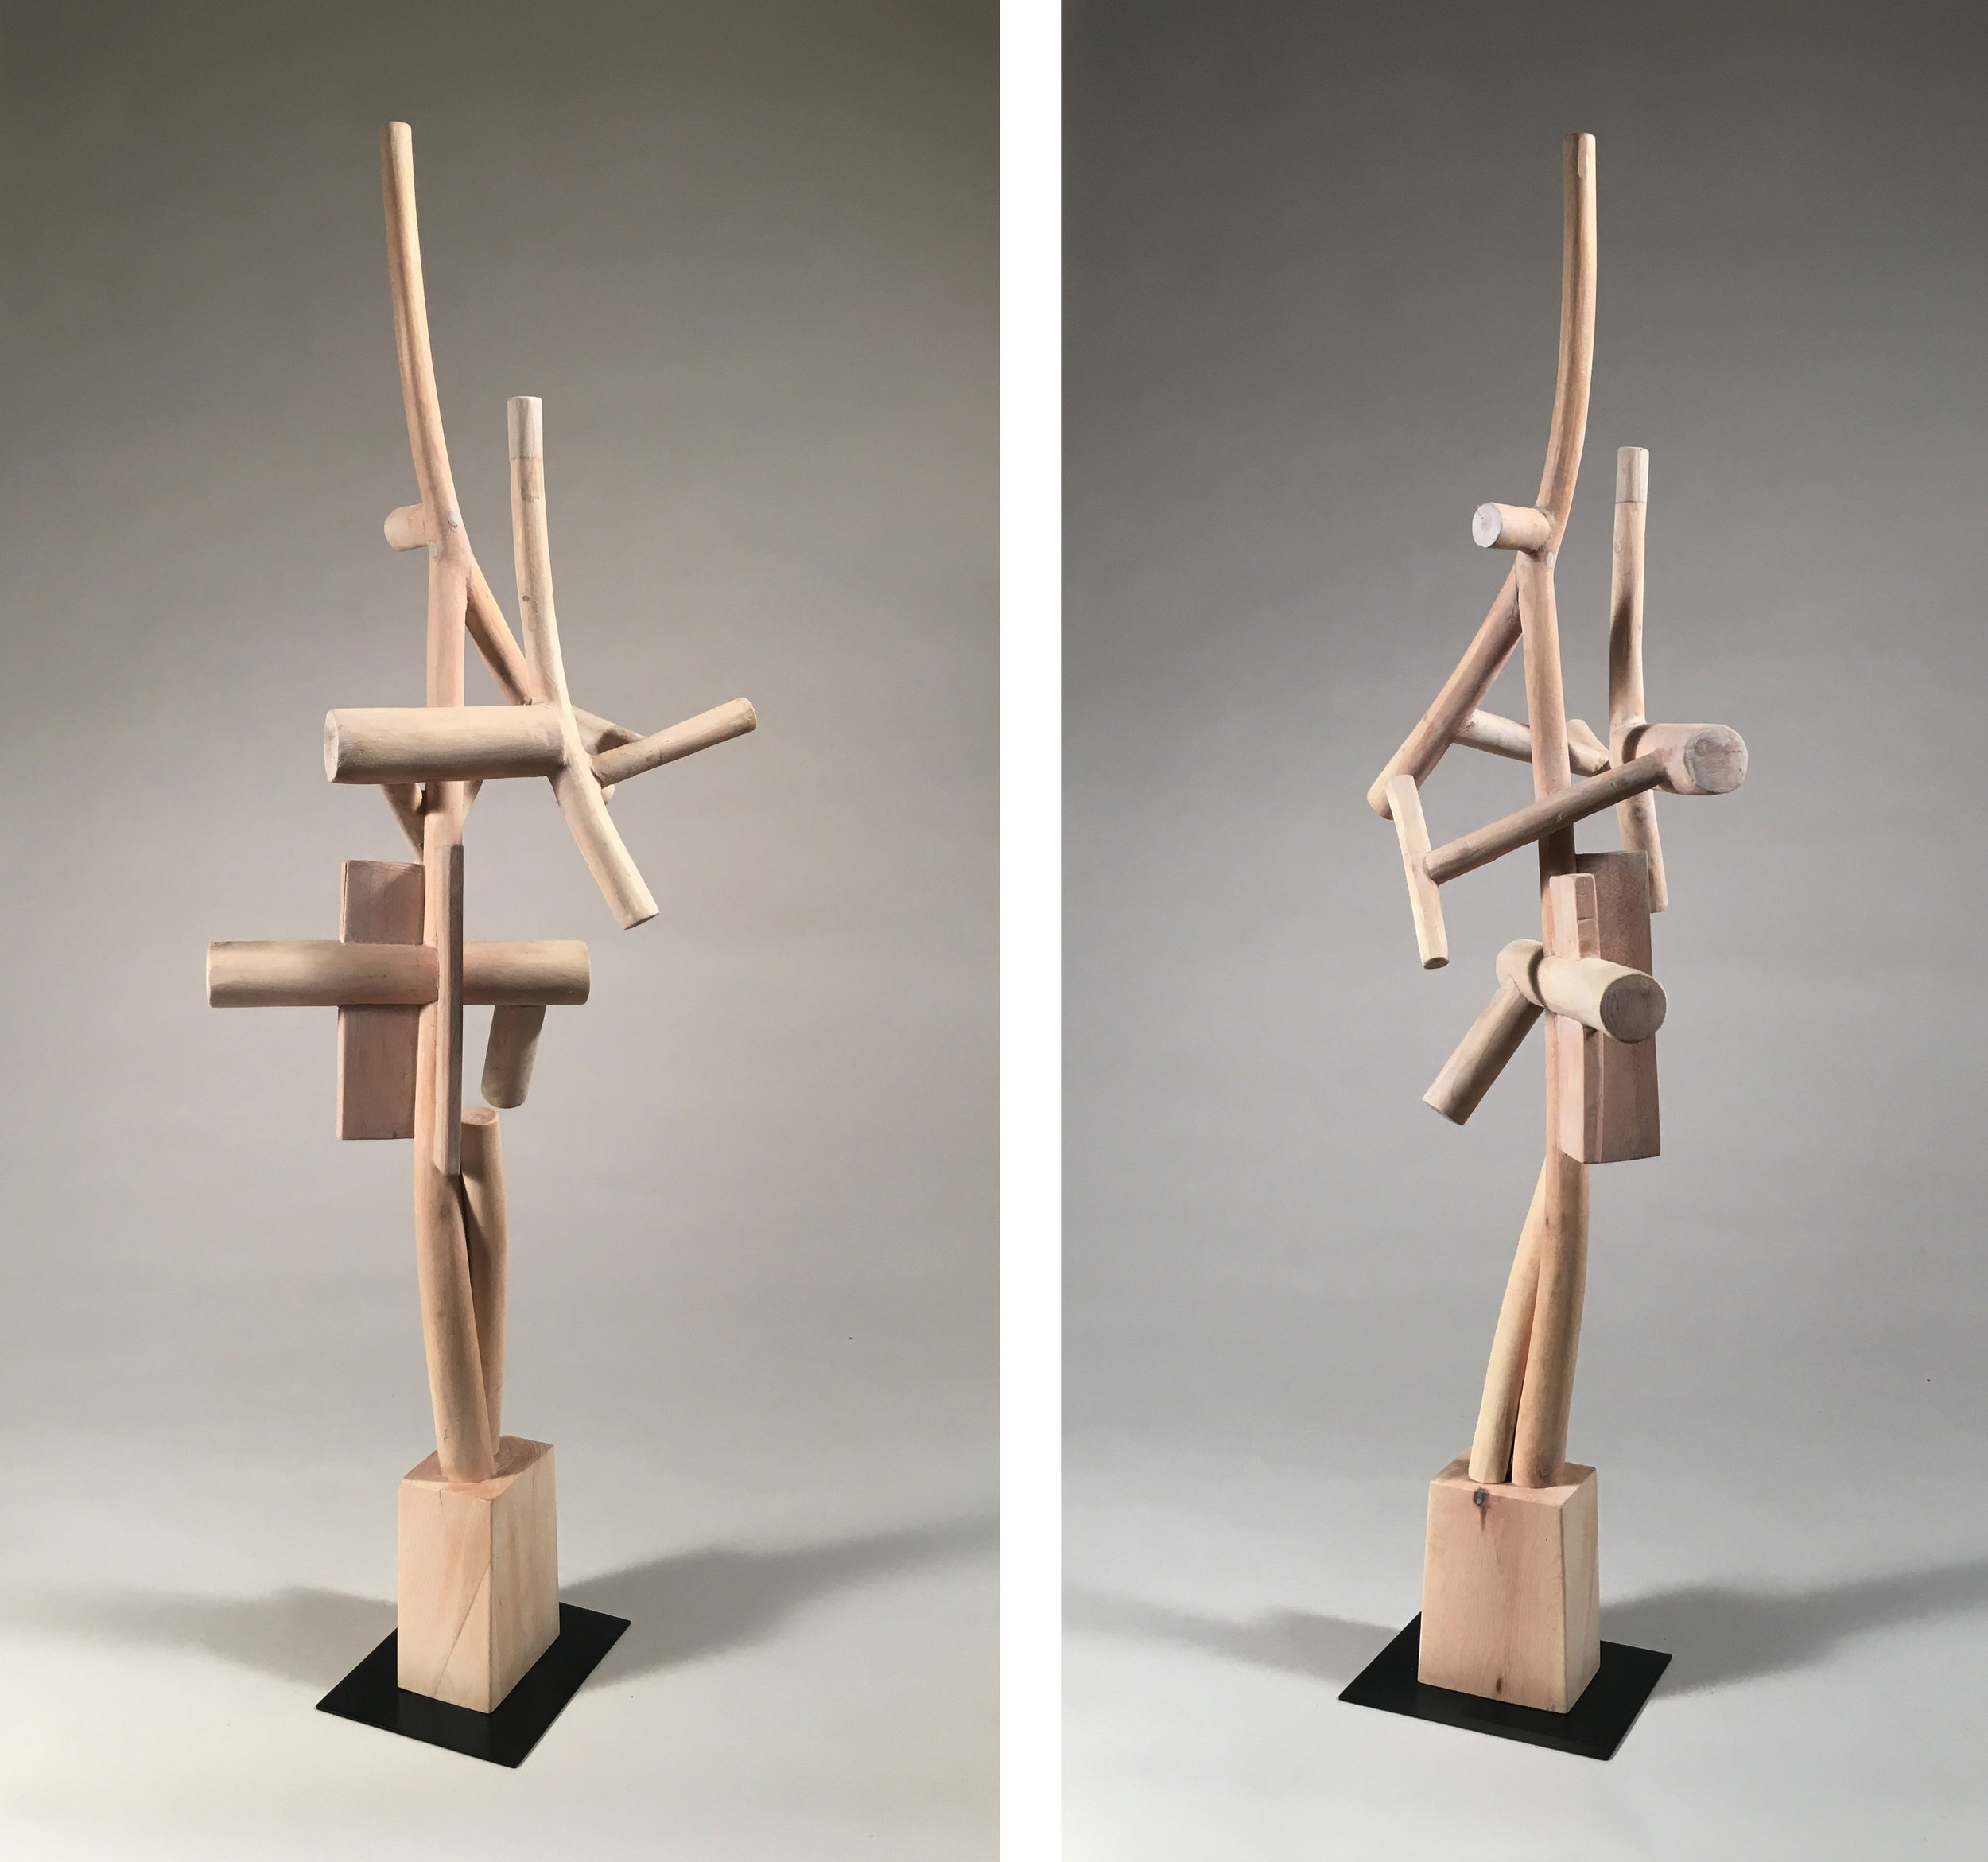   Two Seasons,  31 inches, maple, 2017-18 